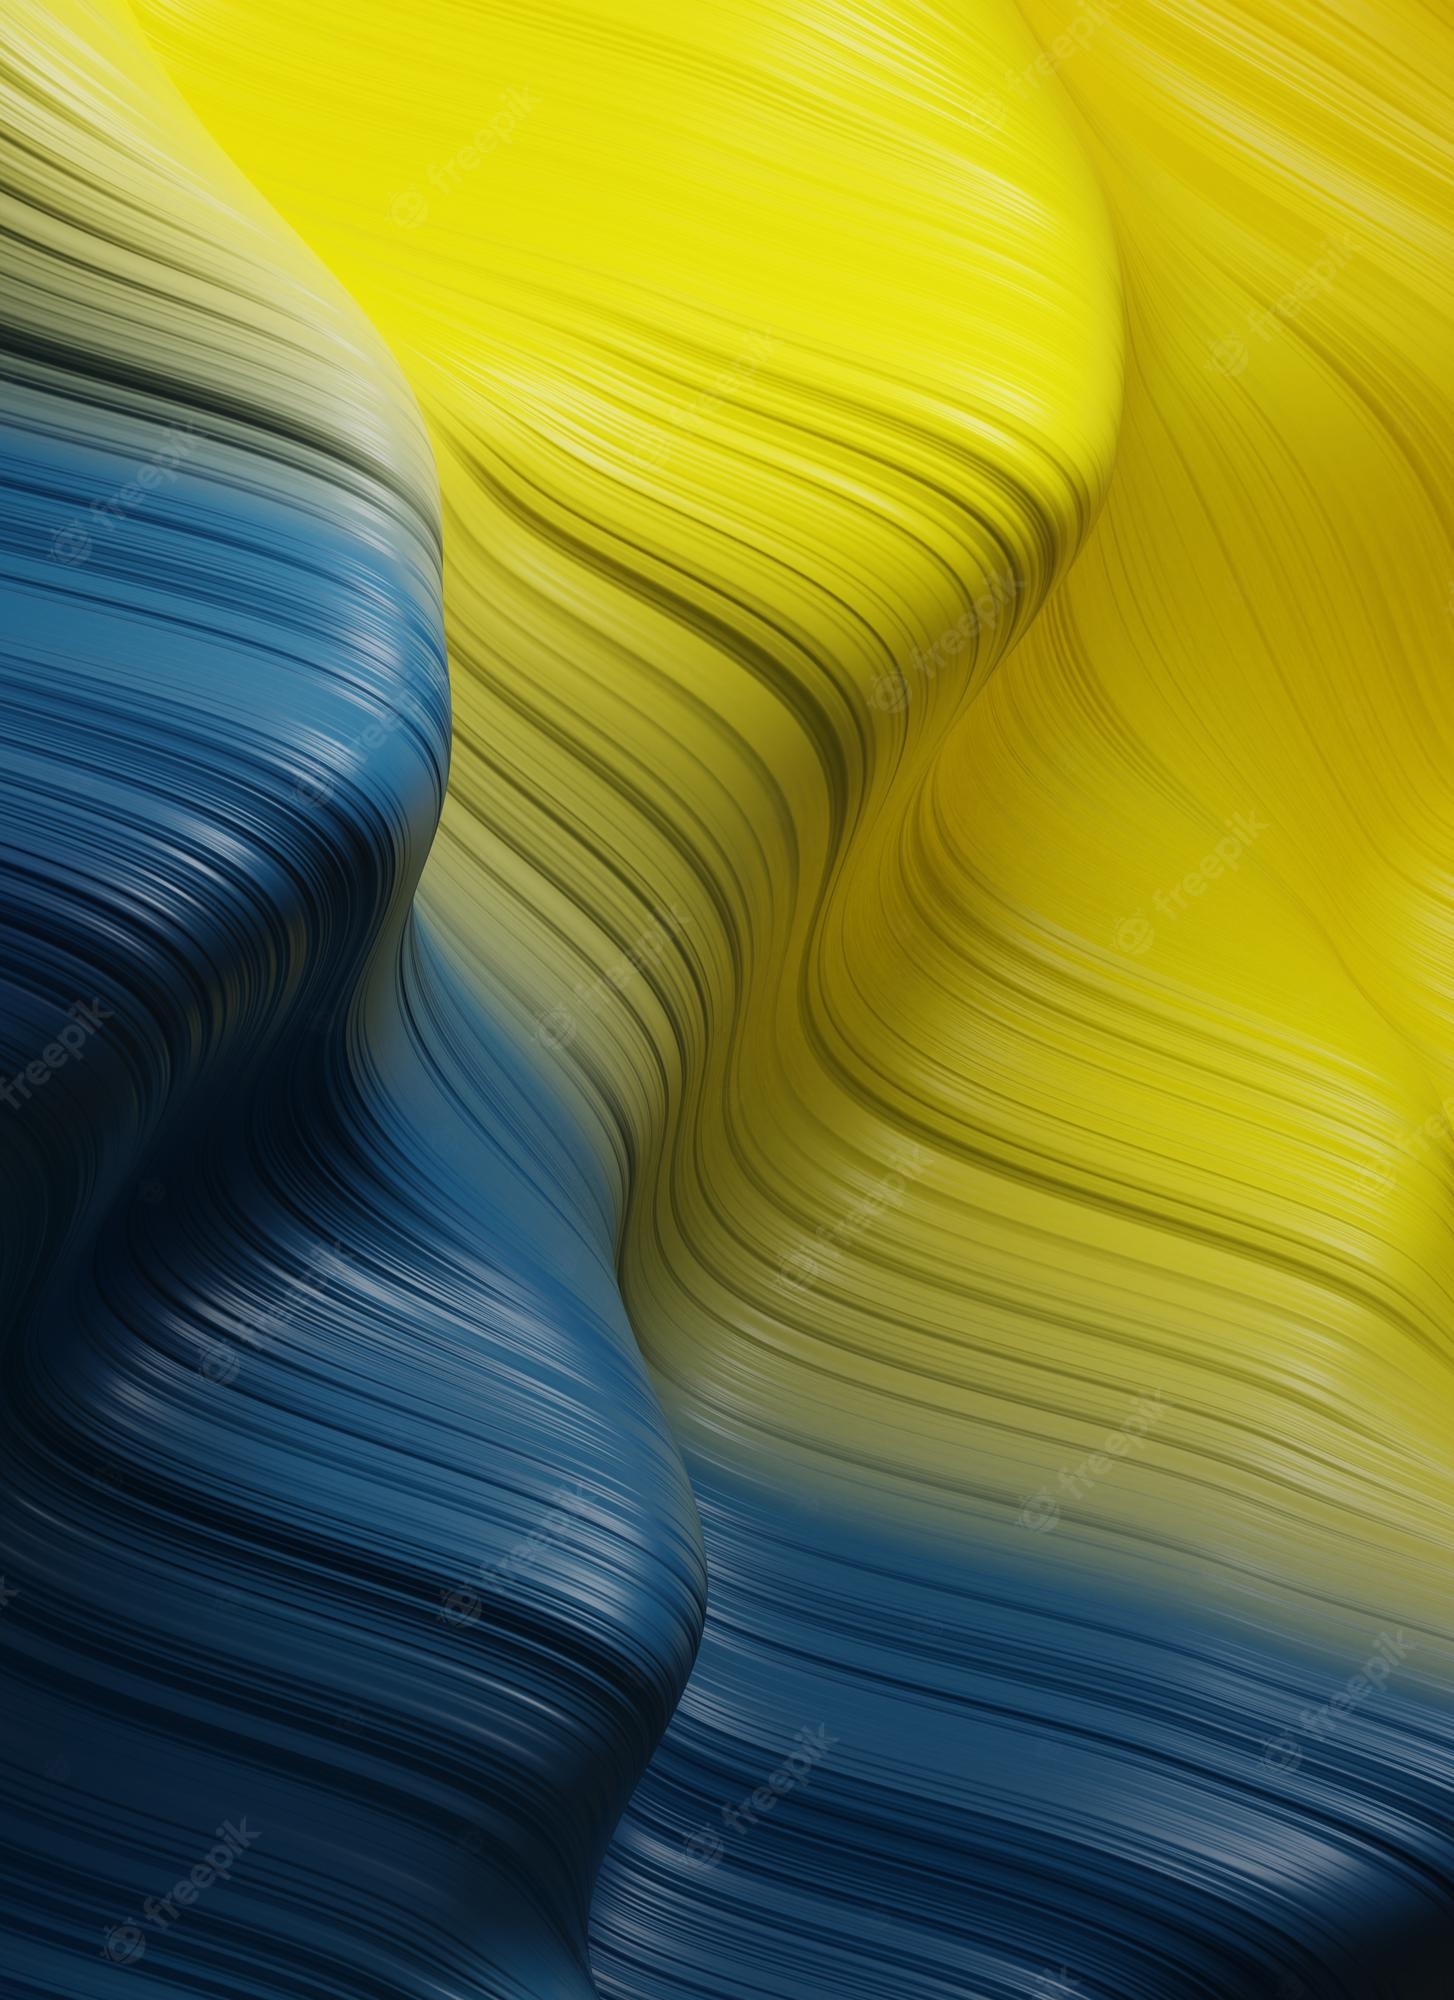 Premium Photo. Modern 3D abstract background with curvy surface yellow and blue ukraine flag wallpaper with copyspace pattern wallpaper abstract fluid glossy texture colorful 3D render banner style image